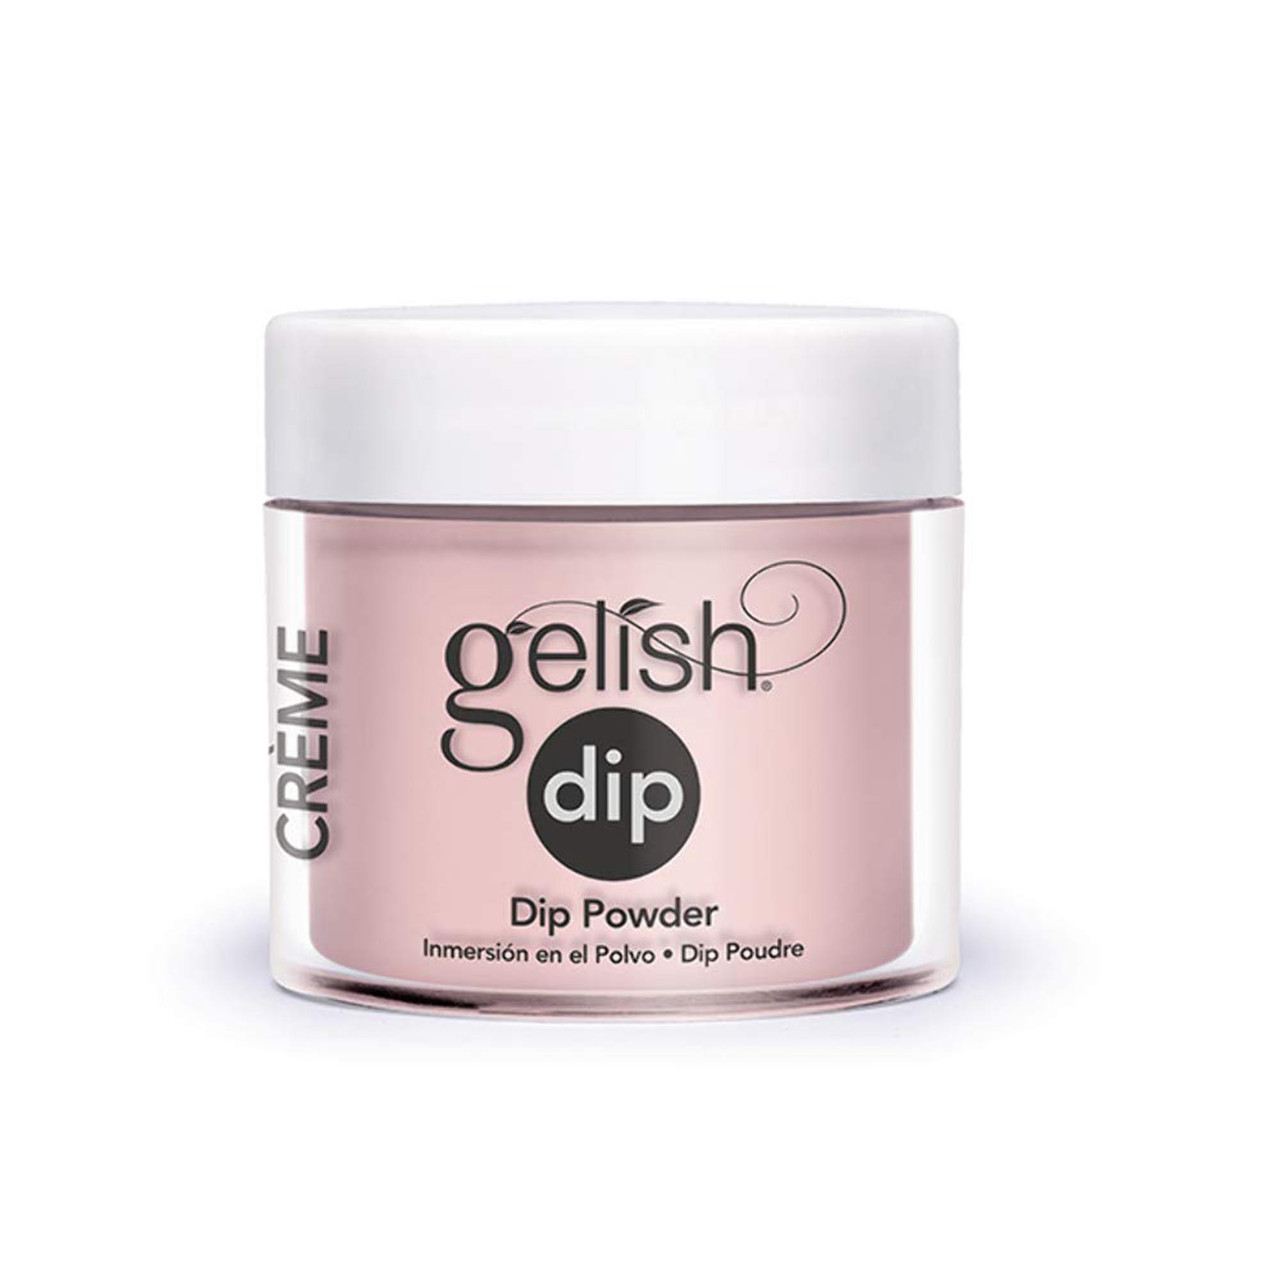 Gelish Dip Powder - 1610011 - Luxe Be A Lady